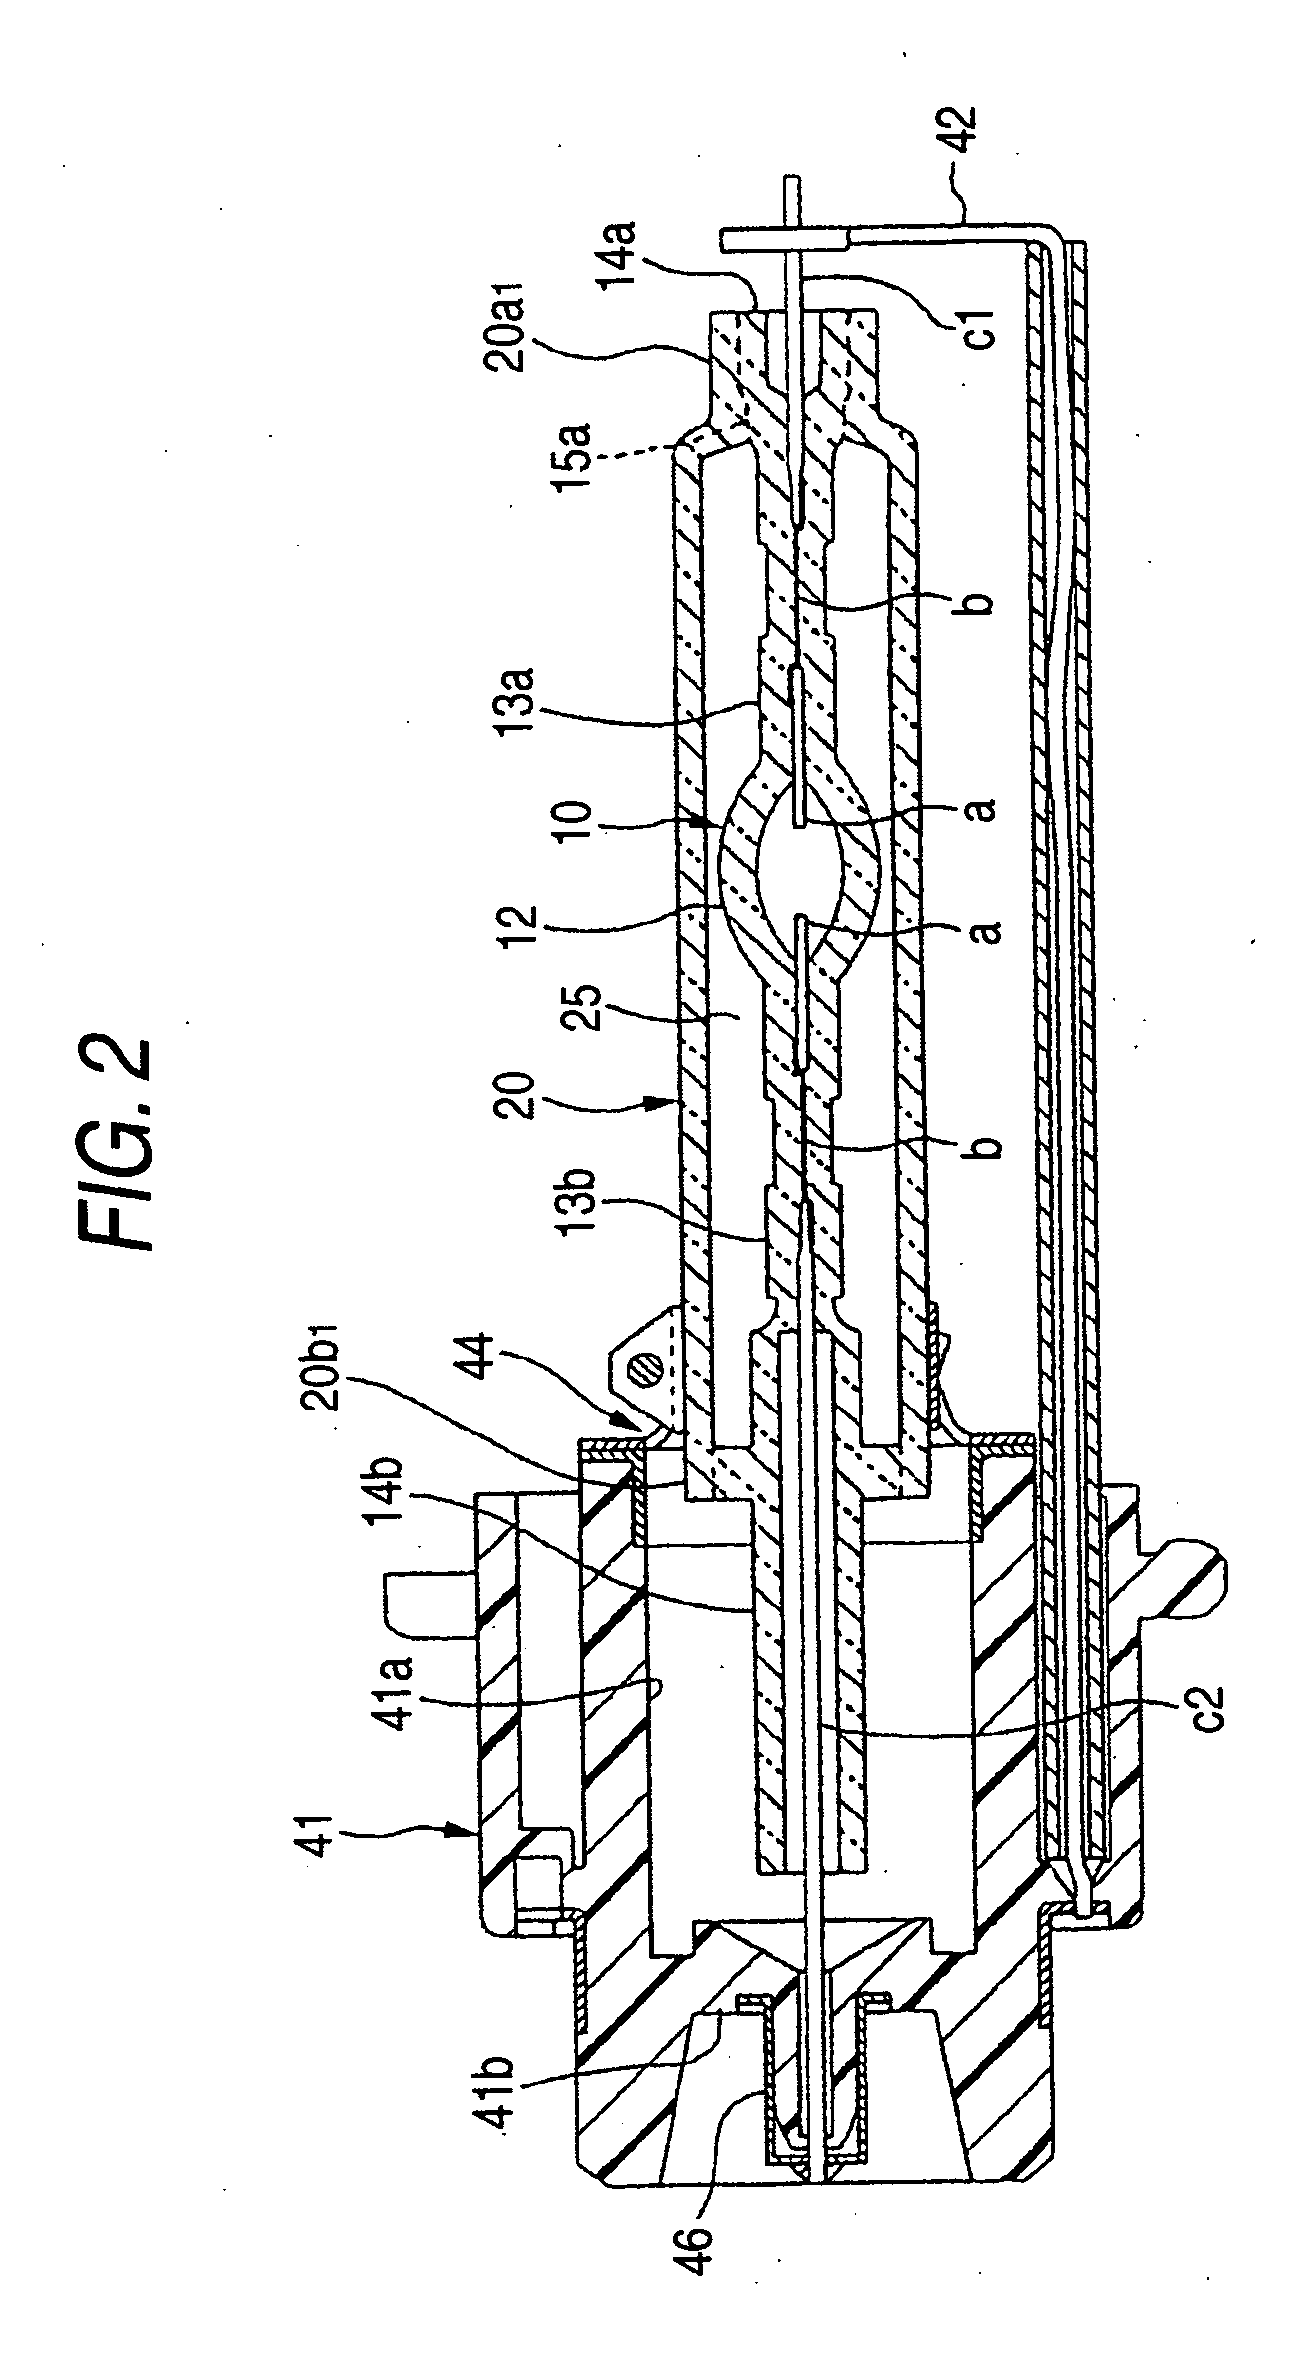 Method and apparatus for welding shroud glass tube in arc tube for discharge lamp